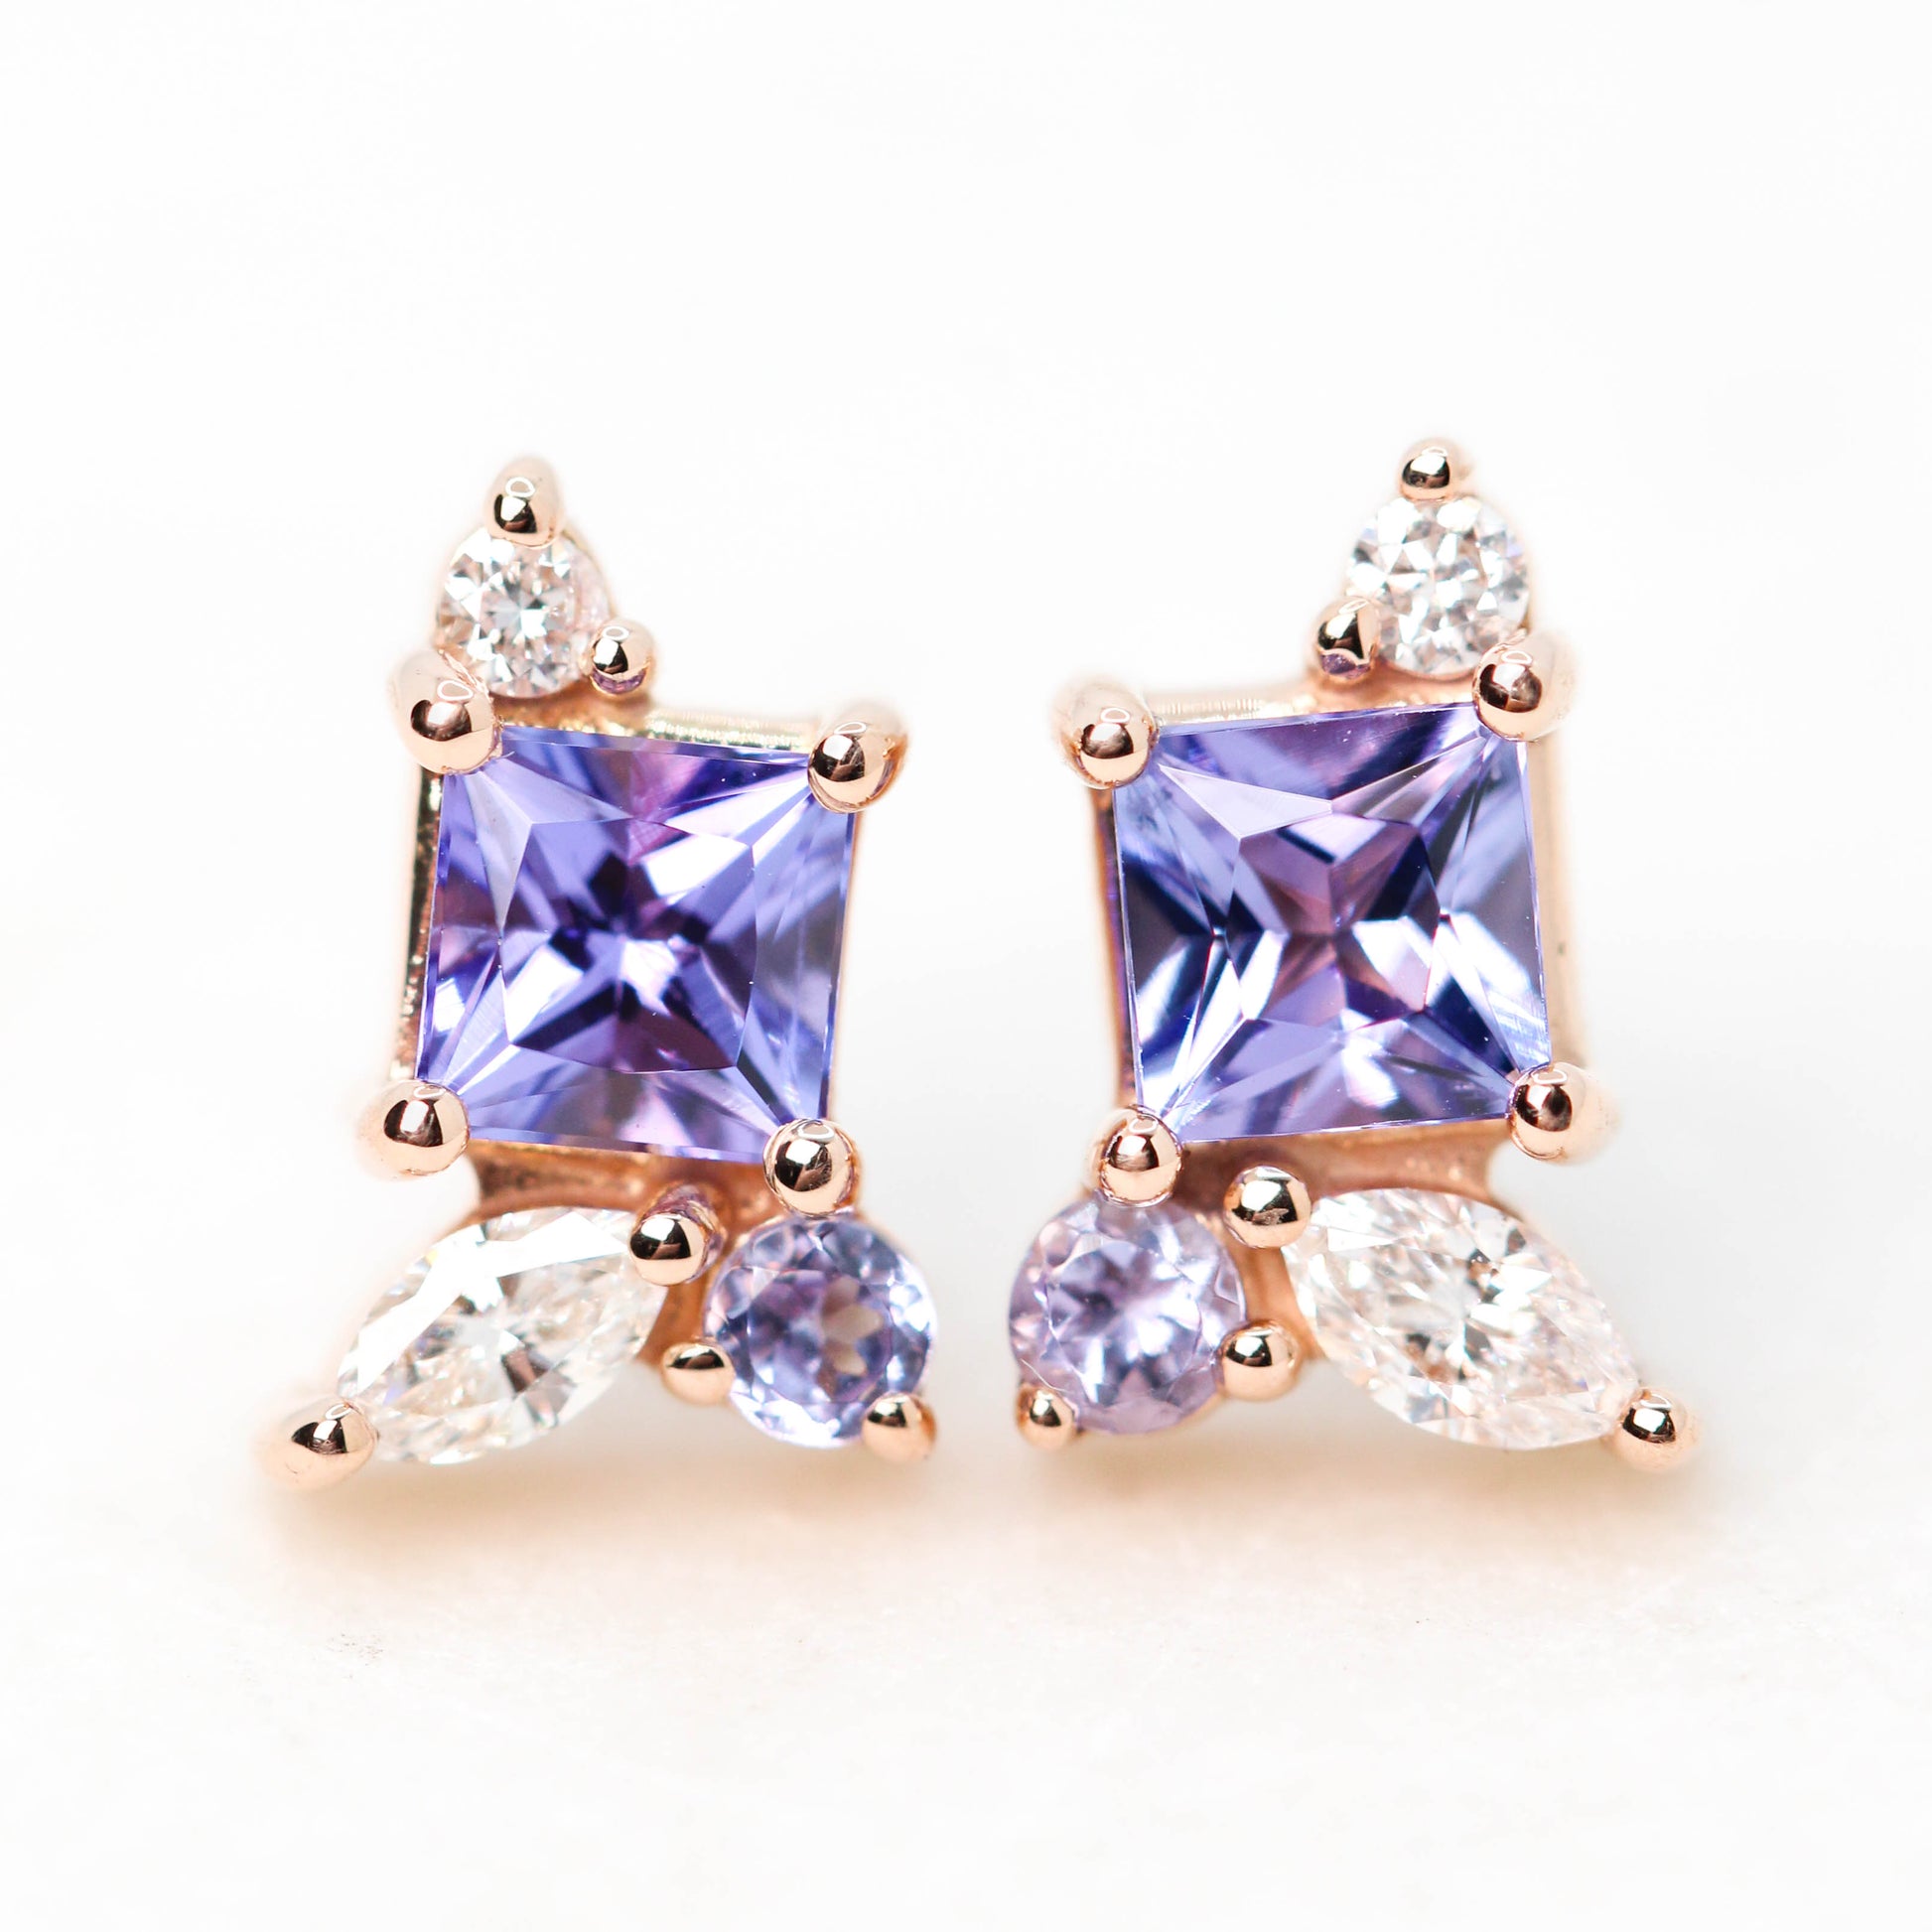 (SB) Princess Cut Tanzanite Earrings with Tanzanite and Diamond Accents - Made to Order, Your Choice of 14k Gold - Midwinter Co. Alternative Bridal Rings and Modern Fine Jewelry